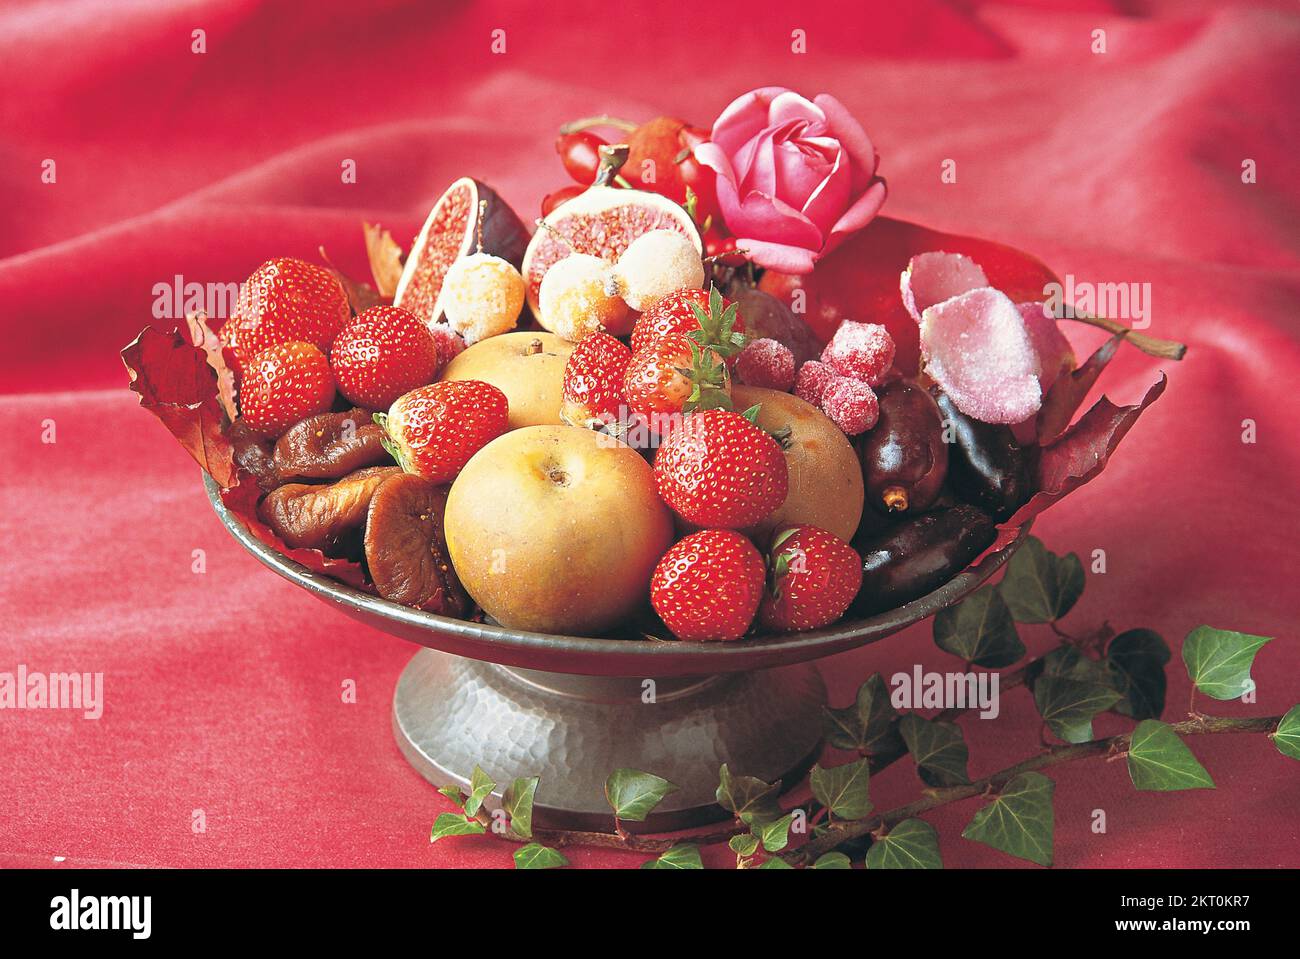 A bowl of dried and sugared fruits Stock Photo